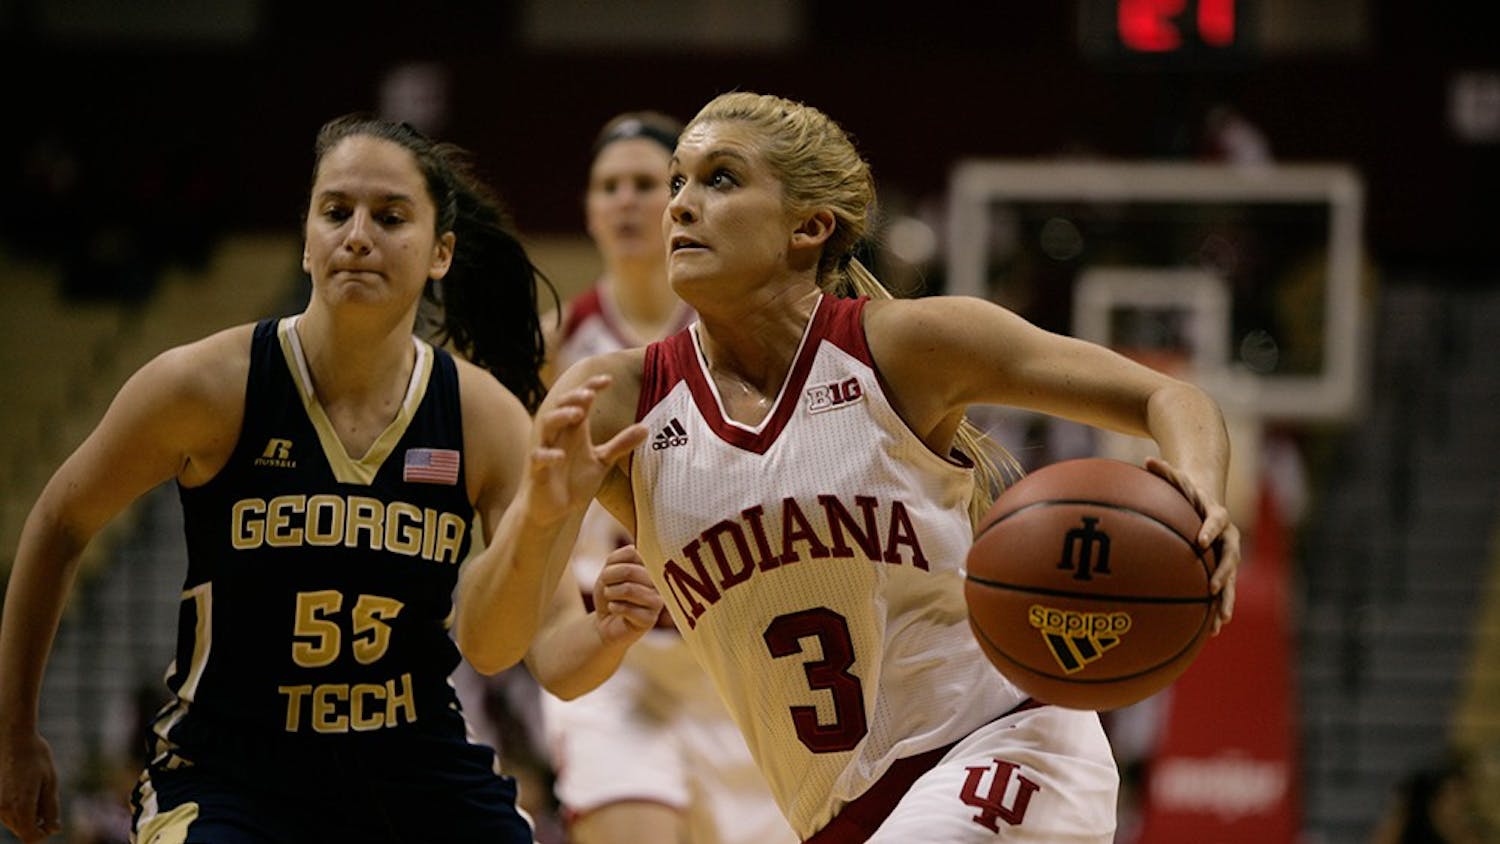 Sophomore guard Tyra Buss runs the ball to the basket against Georgia Tech. Buss led in scoring with 22 points to help the Hoosiers beat Georgia Tech 69-60 Wednesday night. 